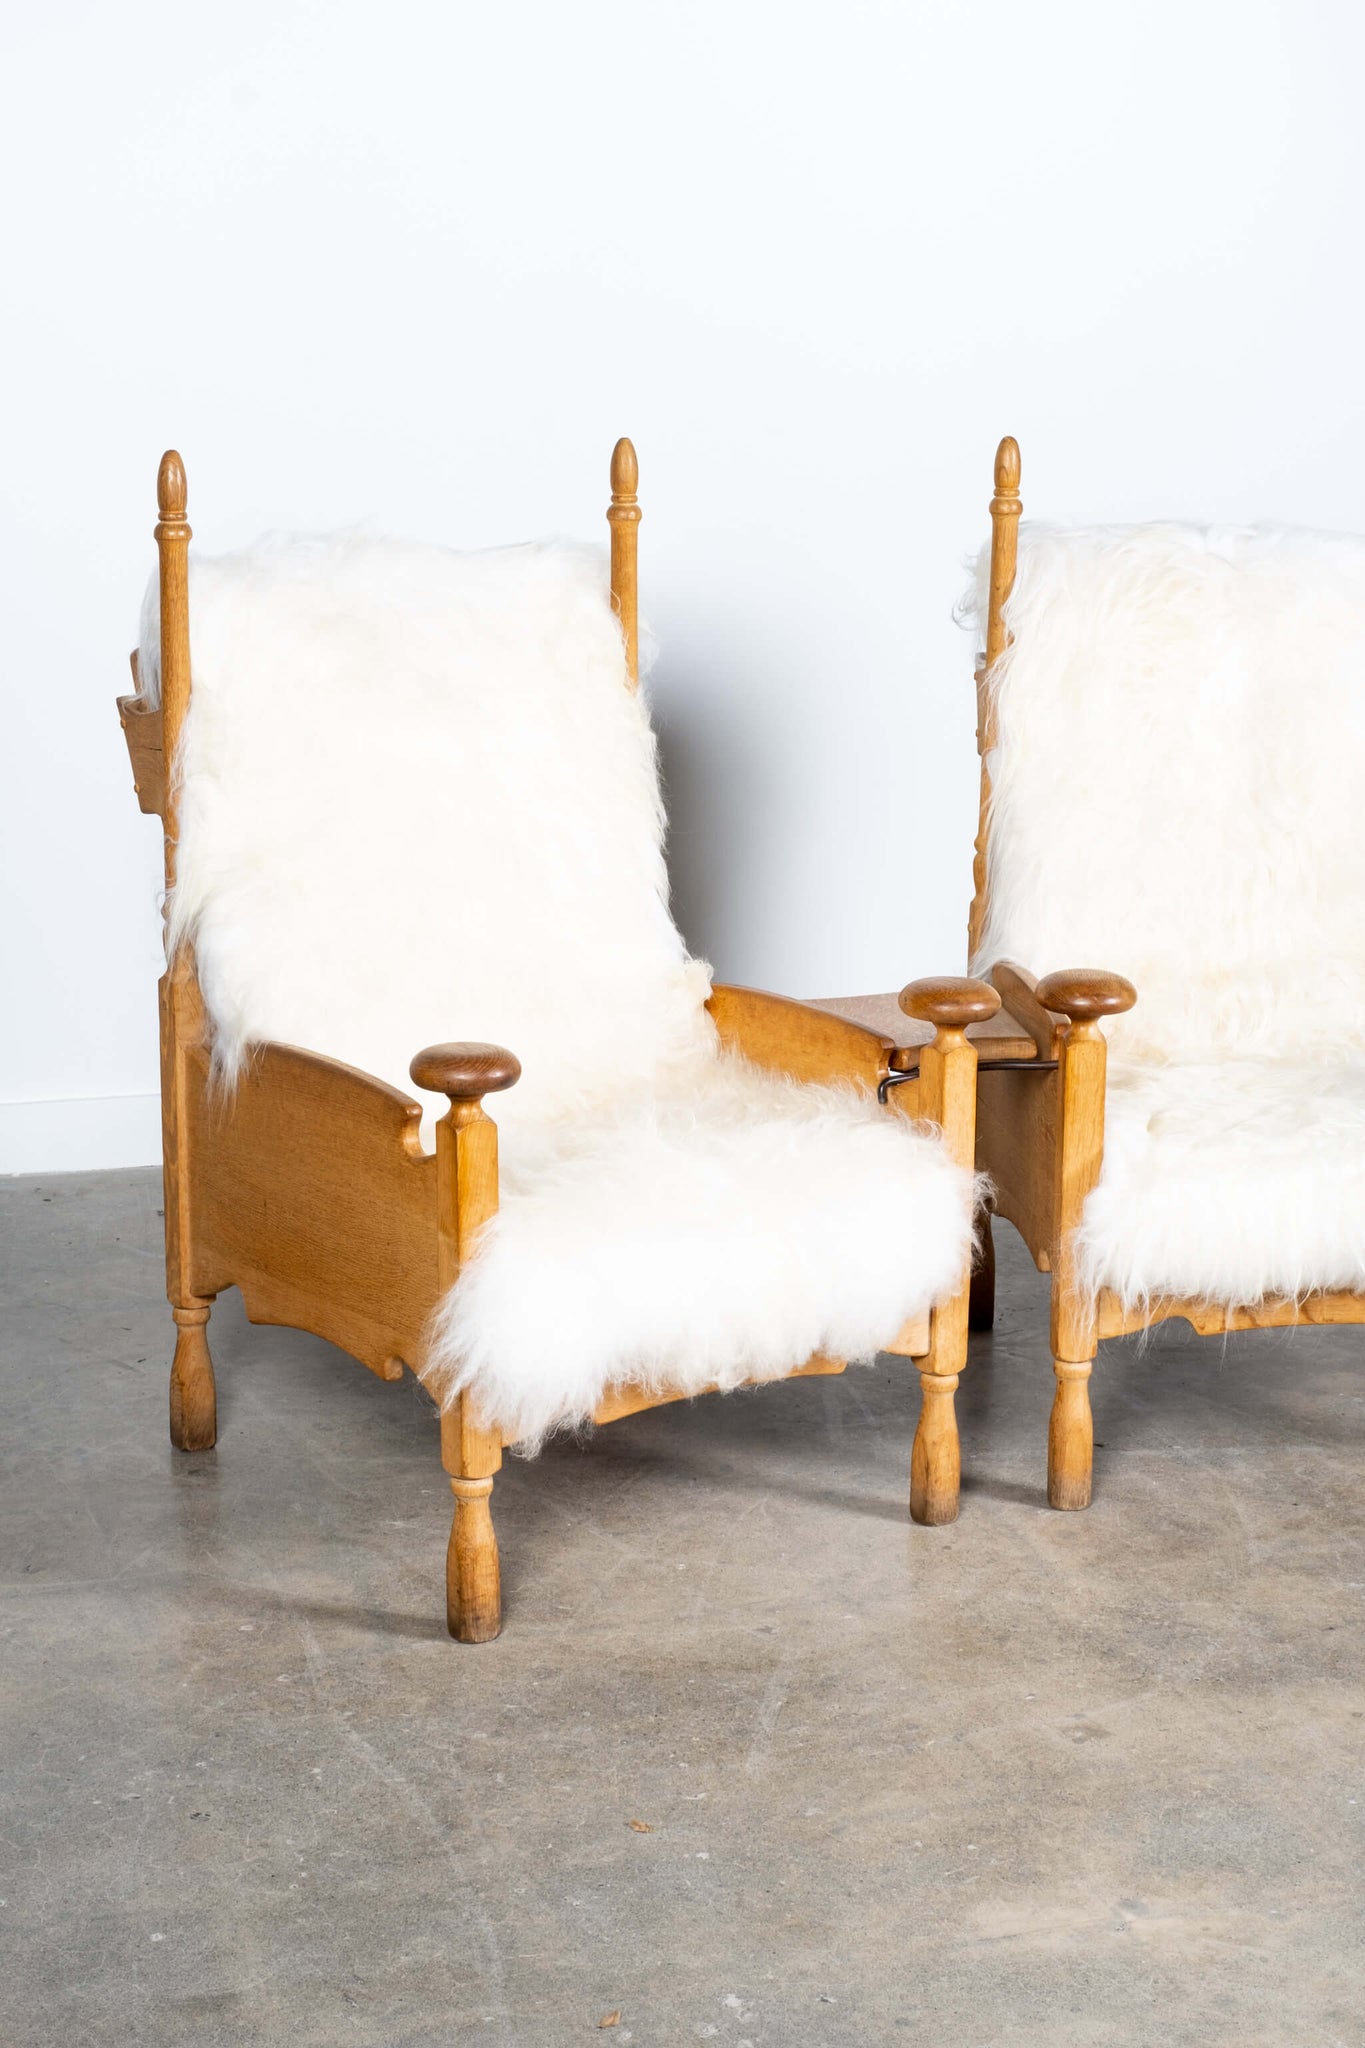 Pair of Vintage Throne Chairs in Longhaired Icelandic Sheepskin with Floating Side Table, close up detail